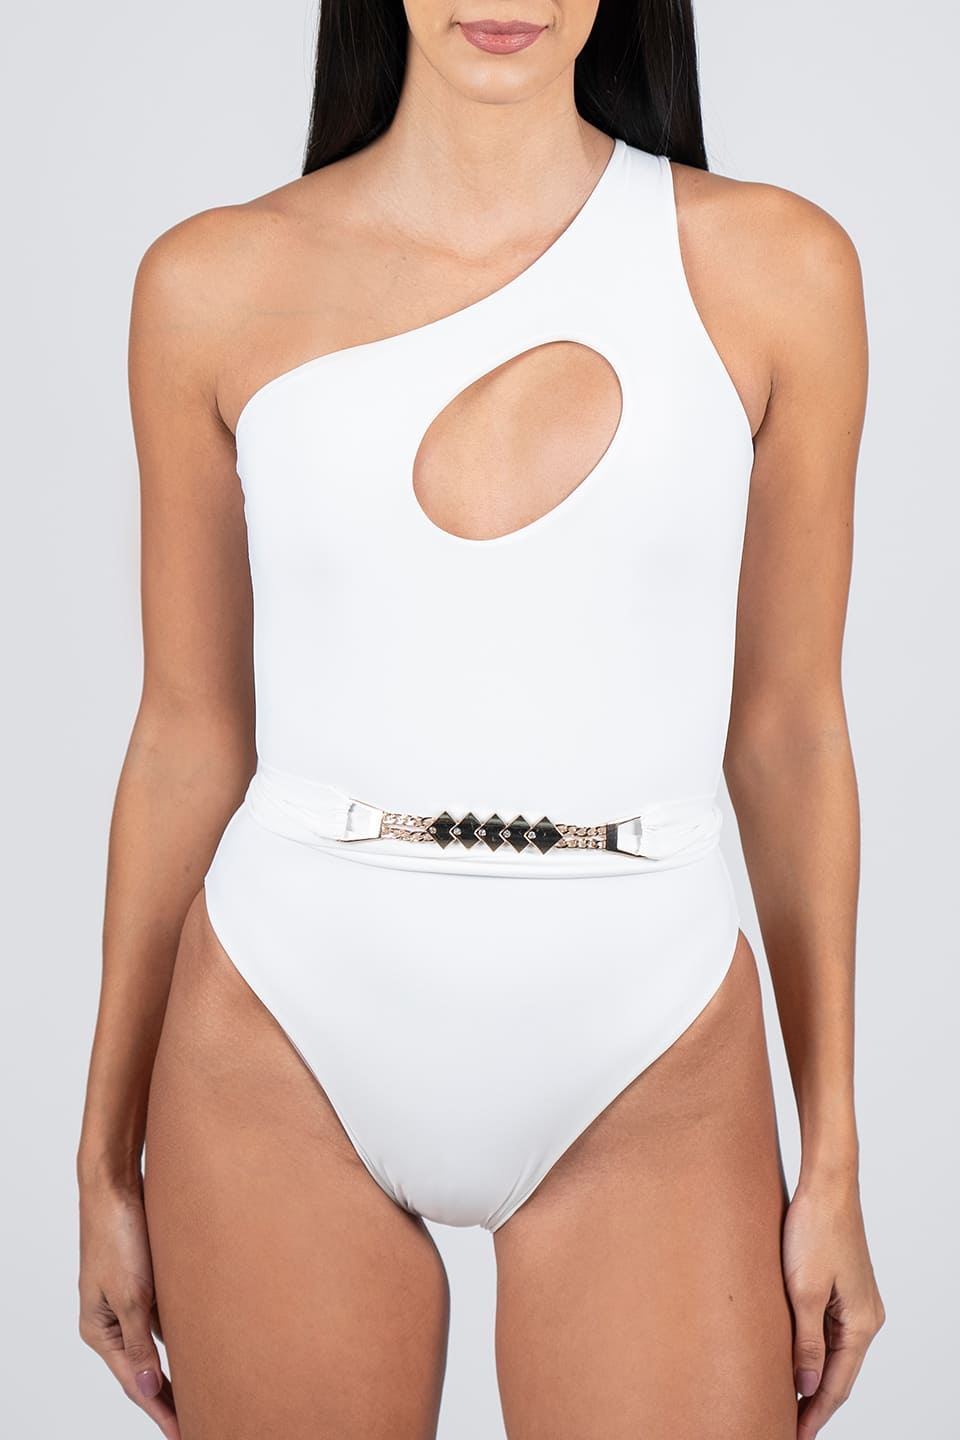 Shop online trendy White Swimsuits from Lavishly Appointed Fashion designer. Product gallery 1